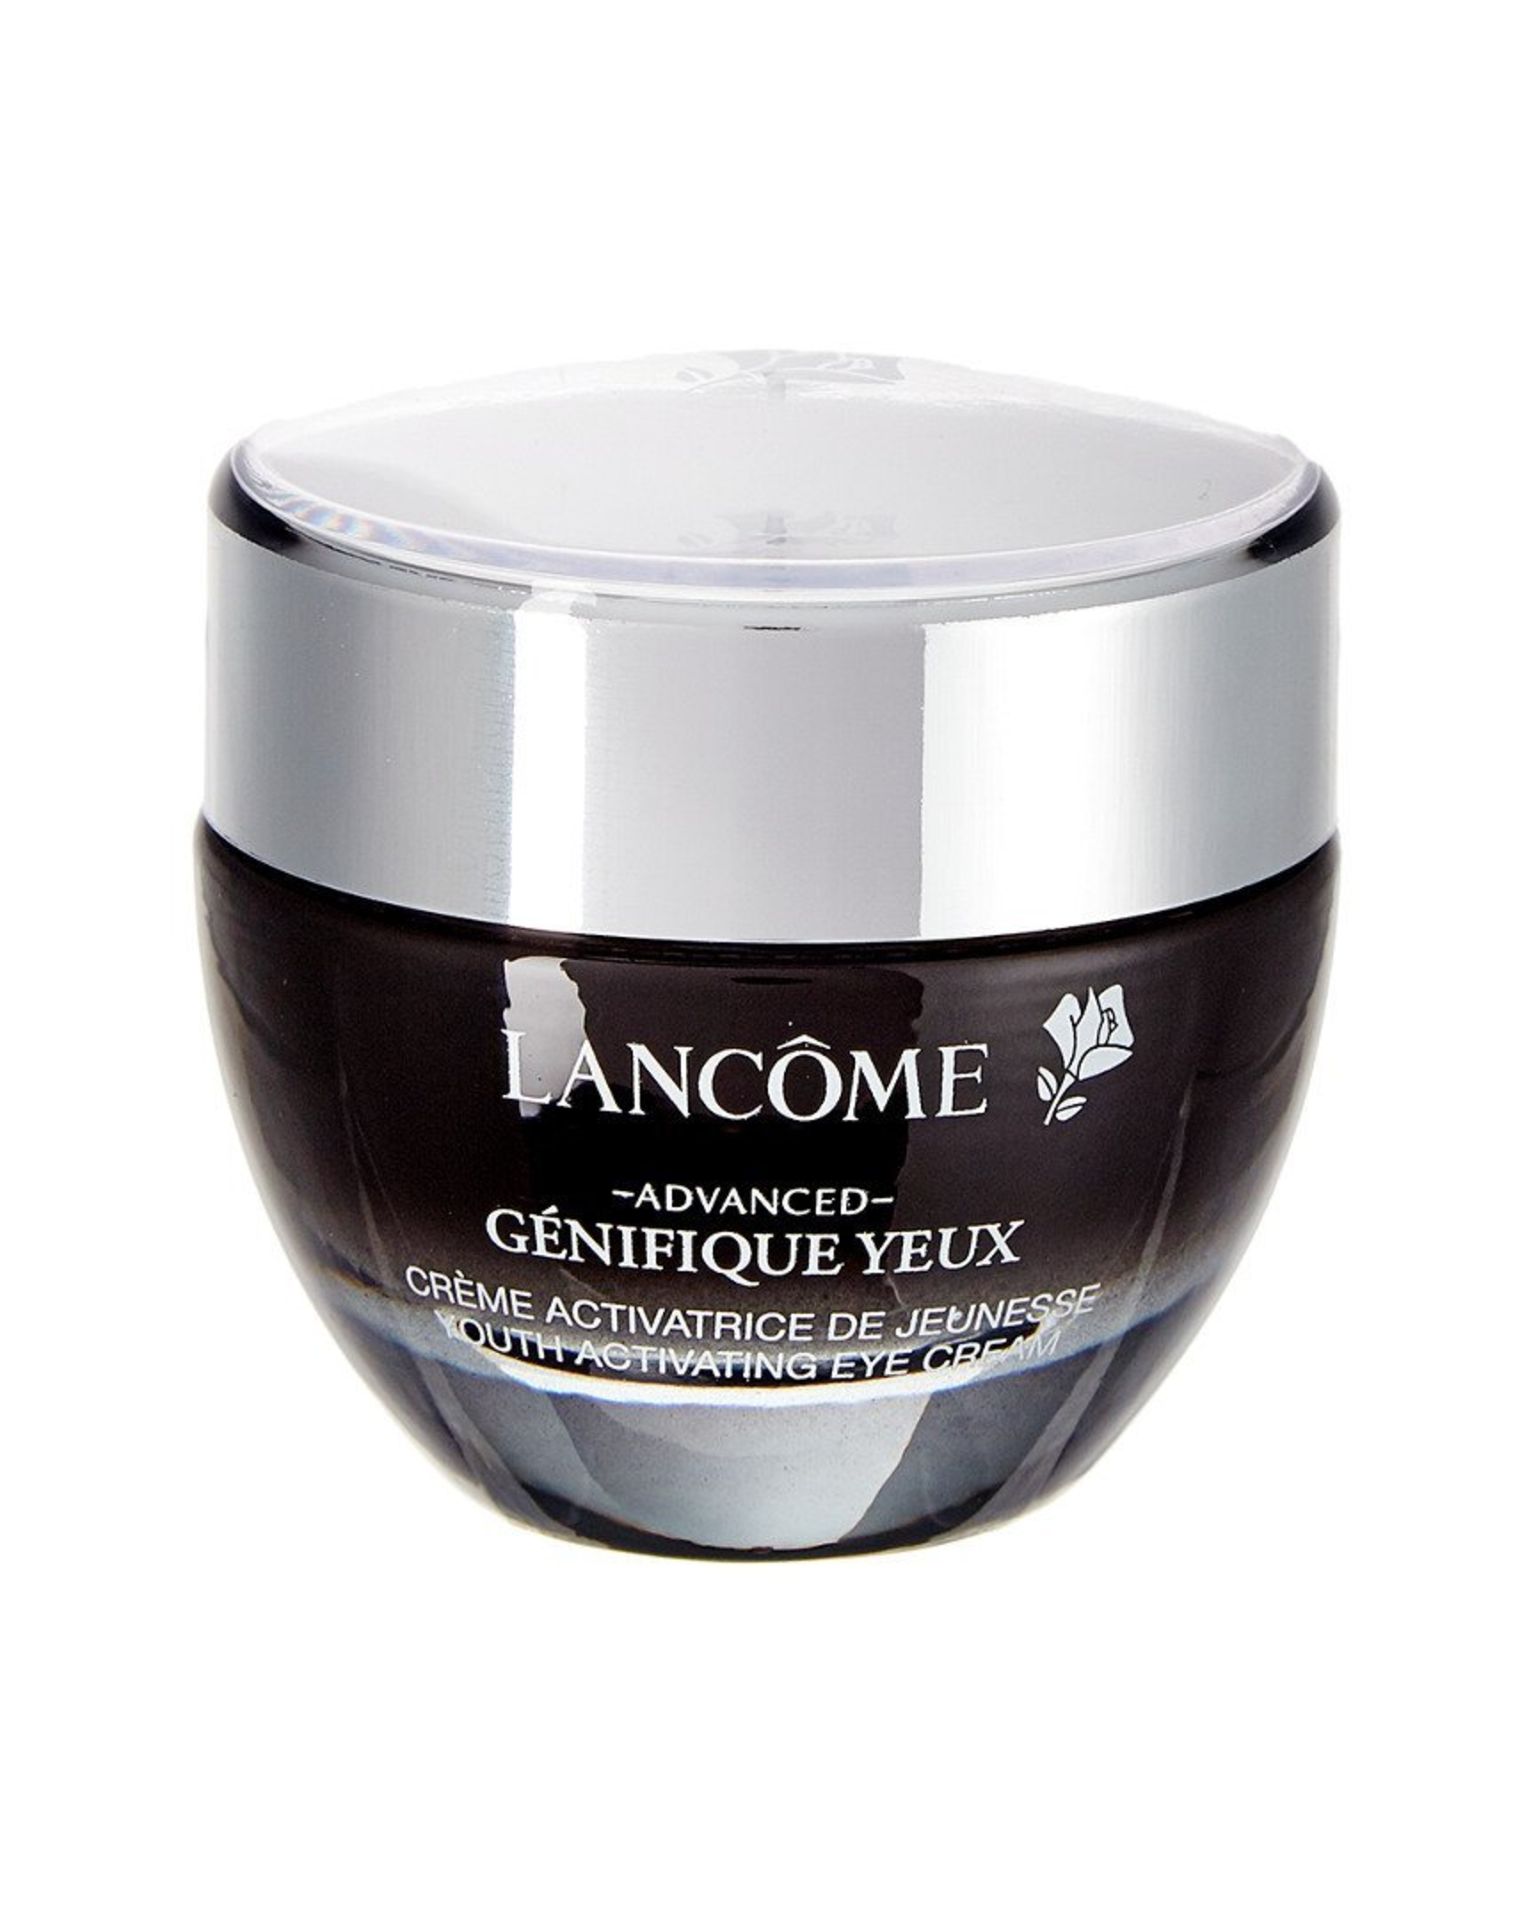 NEW Lancome -Genifique Advanced Youth Activating Eye Cream - RRP £59.99.